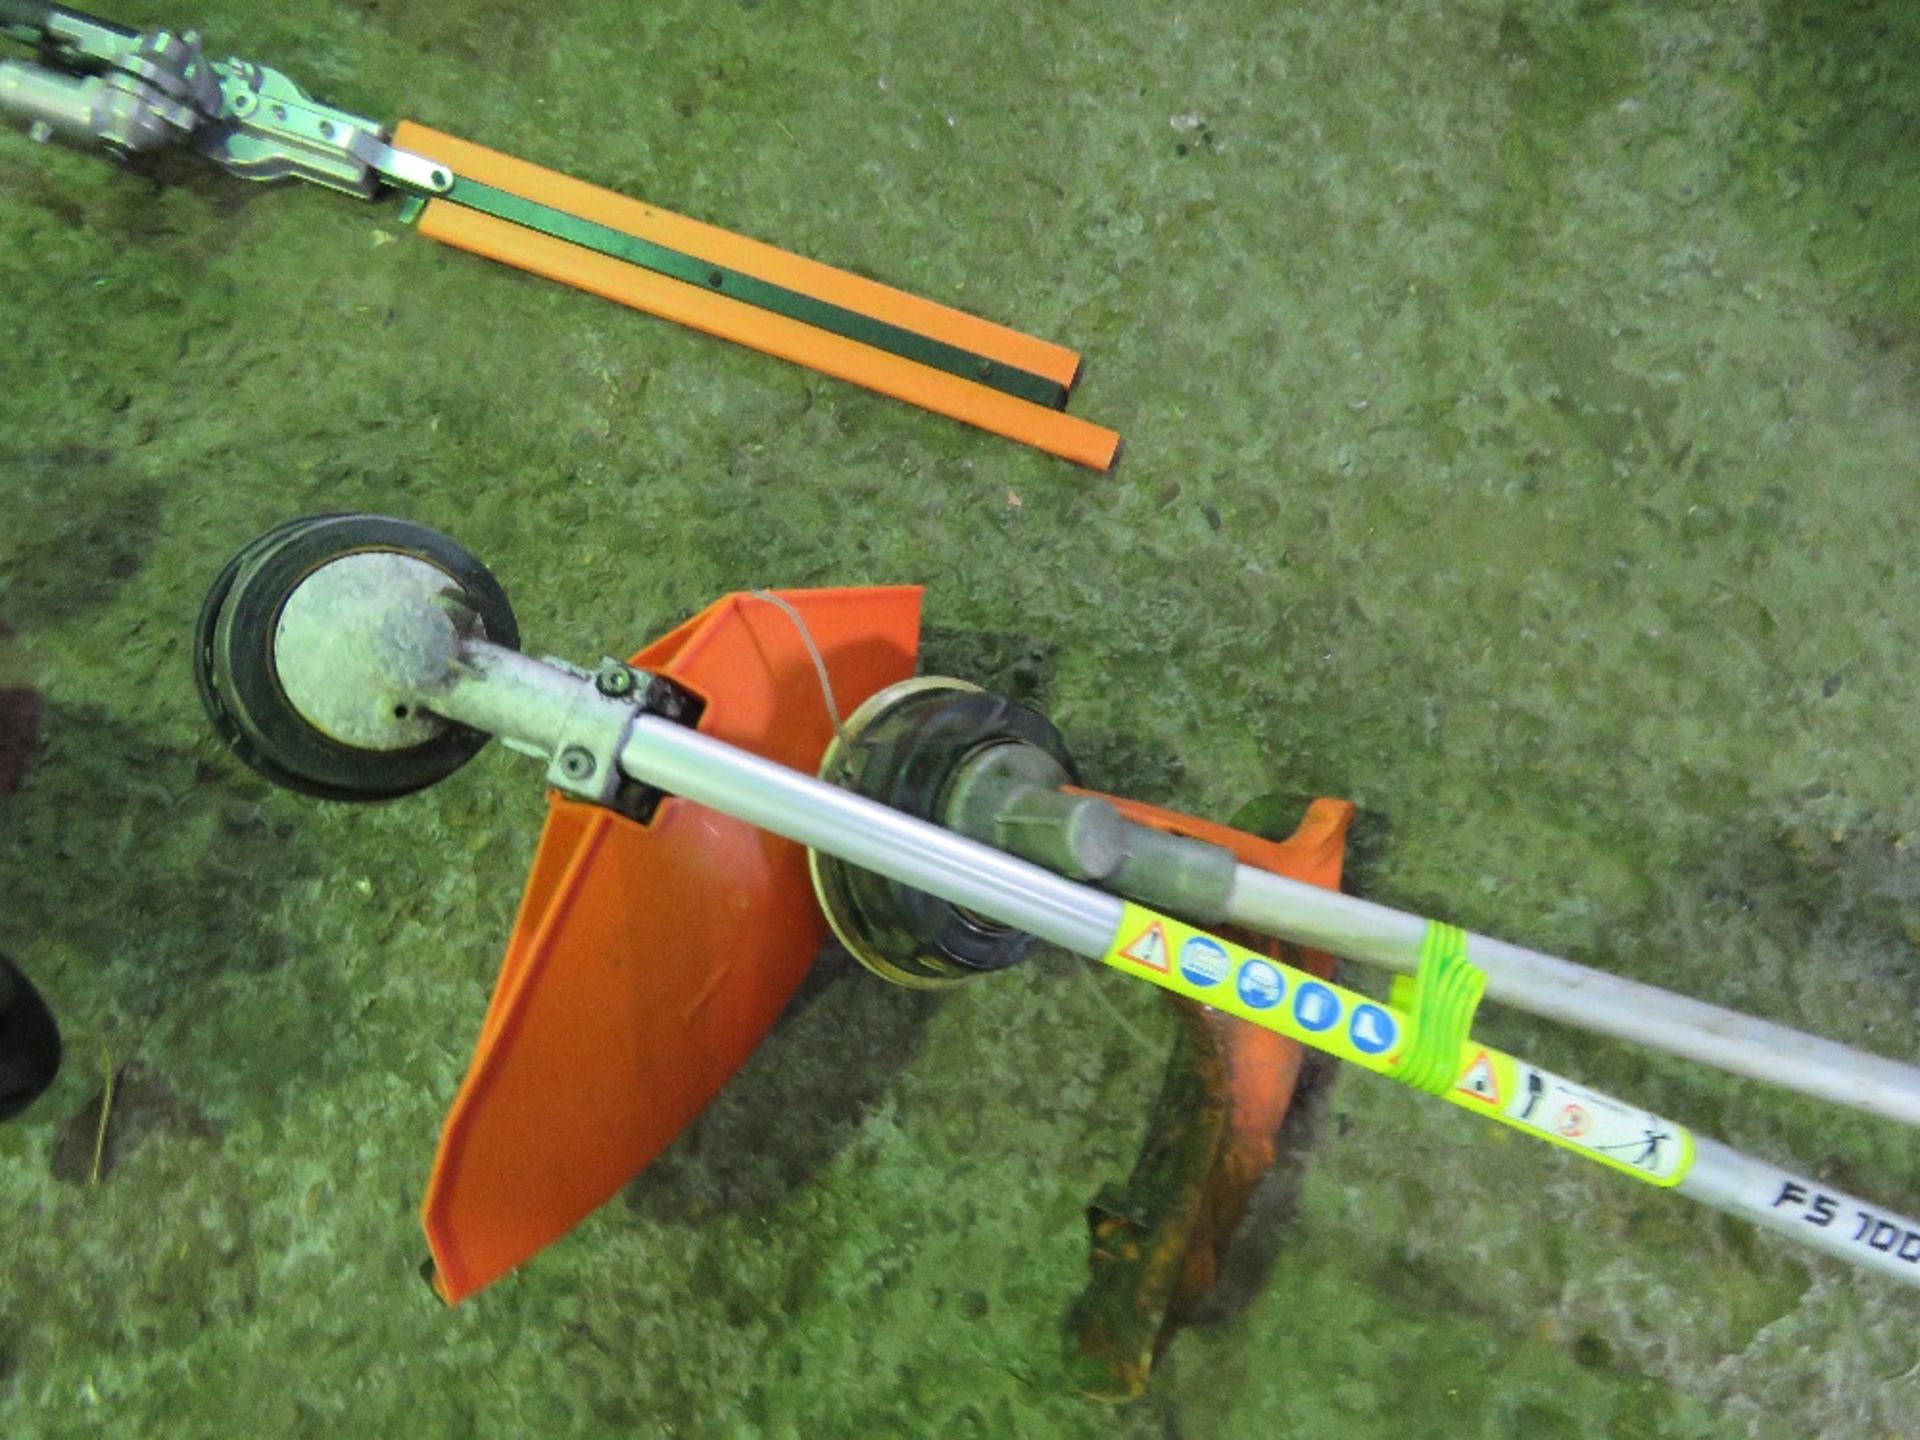 2 X STIHL PETROL ENGINED STRIMMERS: ONE HAS A BENT/DAMAGED SHAFT. THIS LOT IS SOLD UNDER THE AUCTION - Image 4 of 4